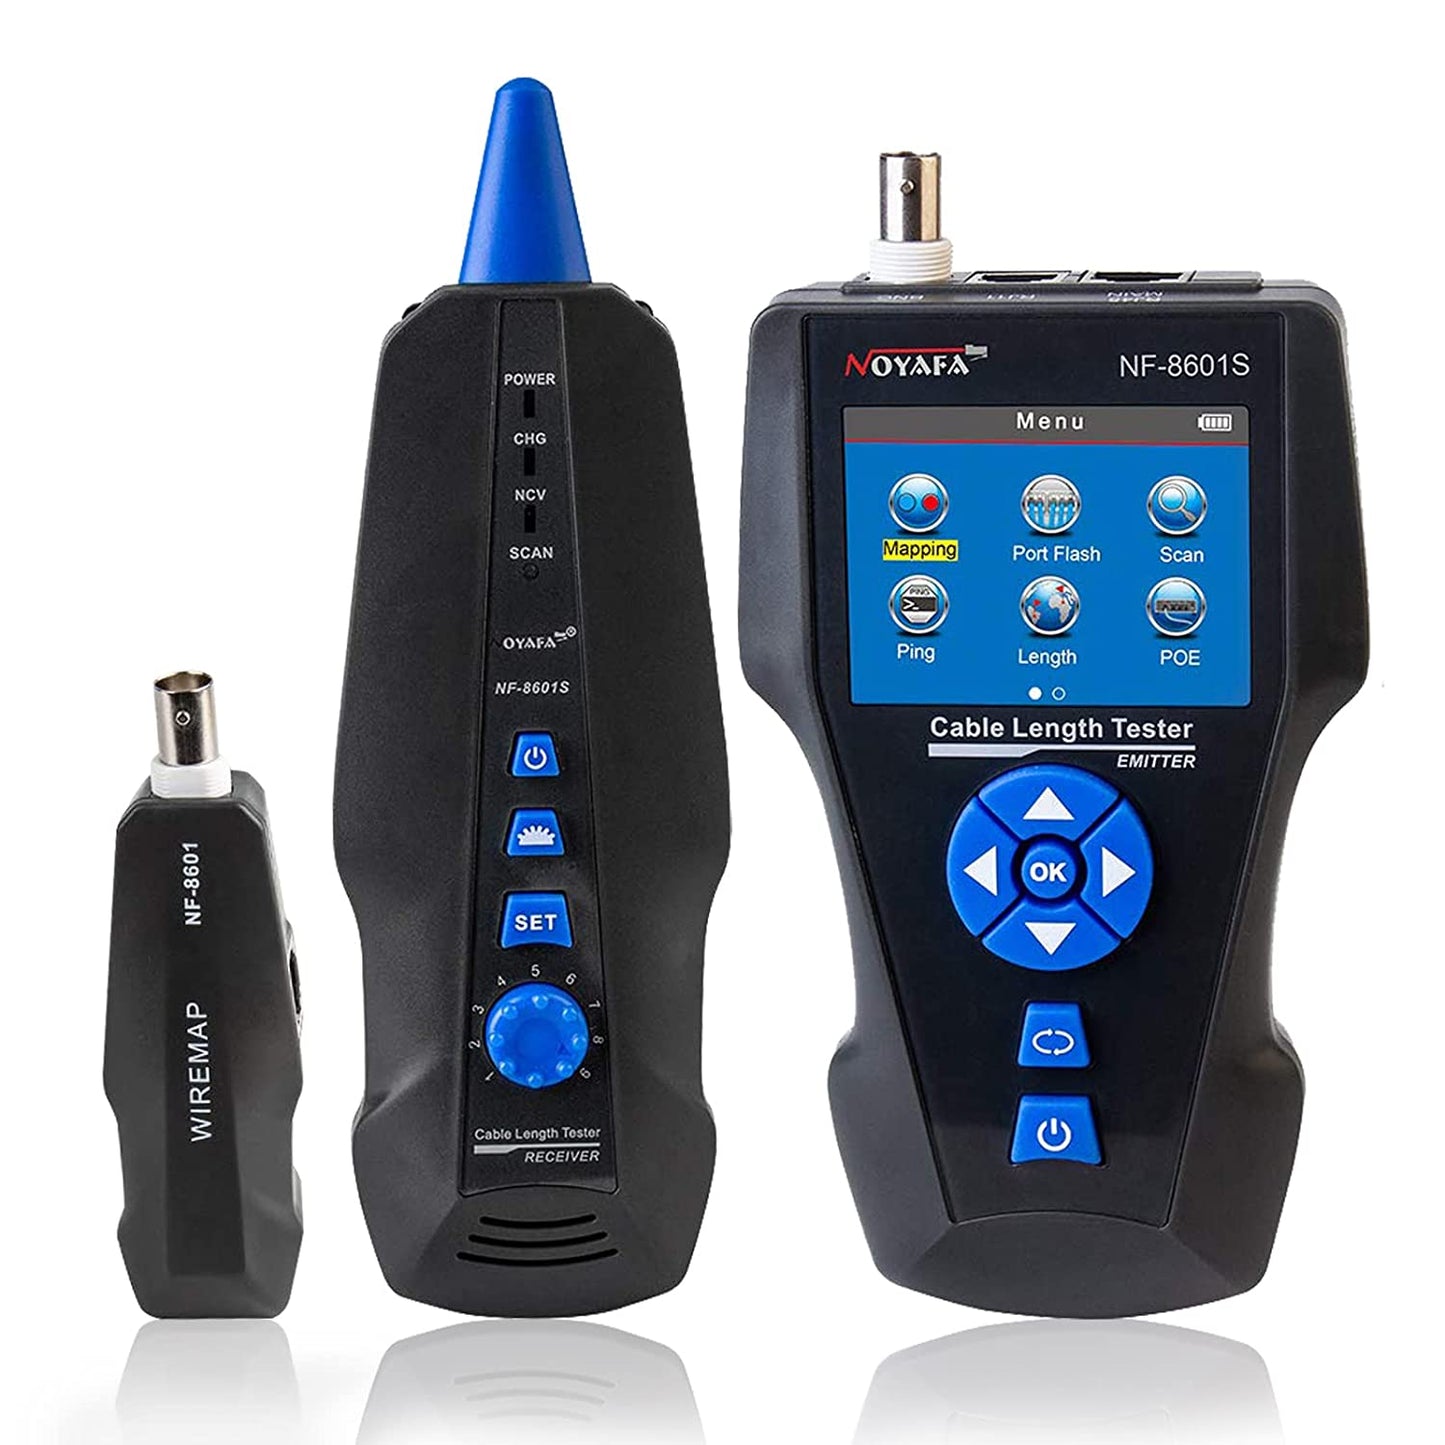 Noyafa NF-300 Coax Cable Tester, Wire Fault Locator with Anti-jamming